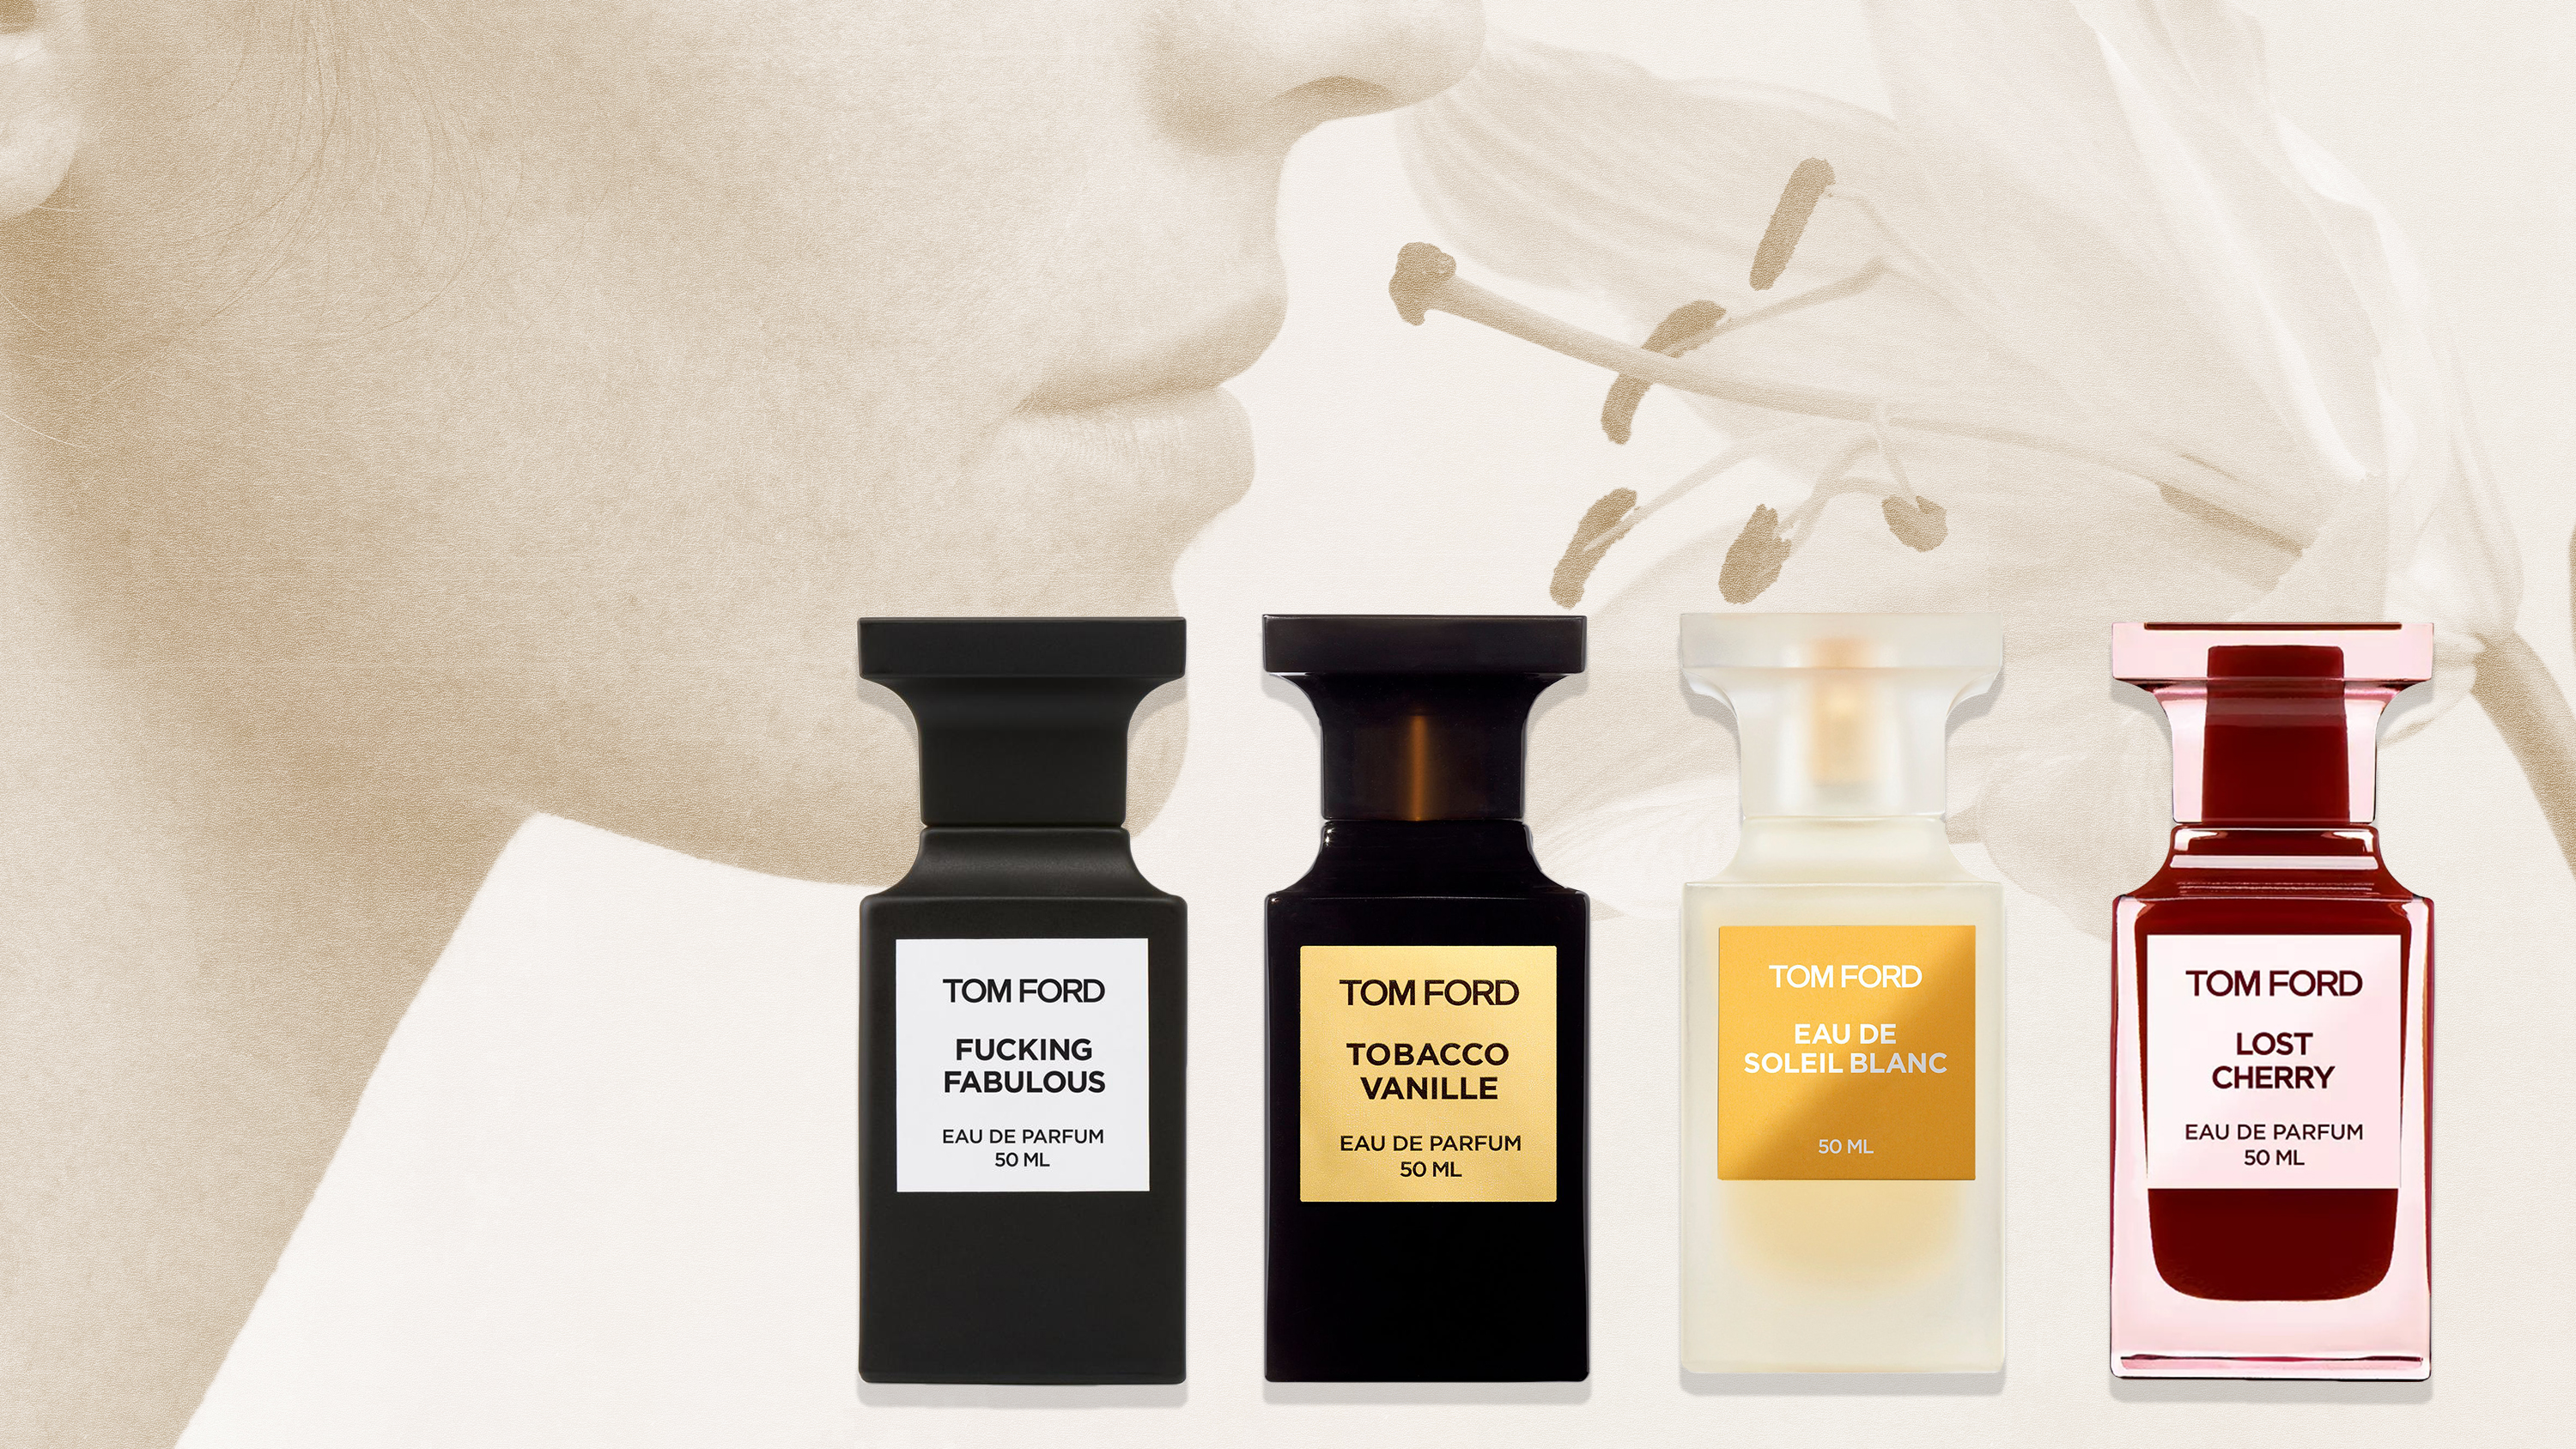 Best Winter fragrances from Sephora. Best perfumes for winter